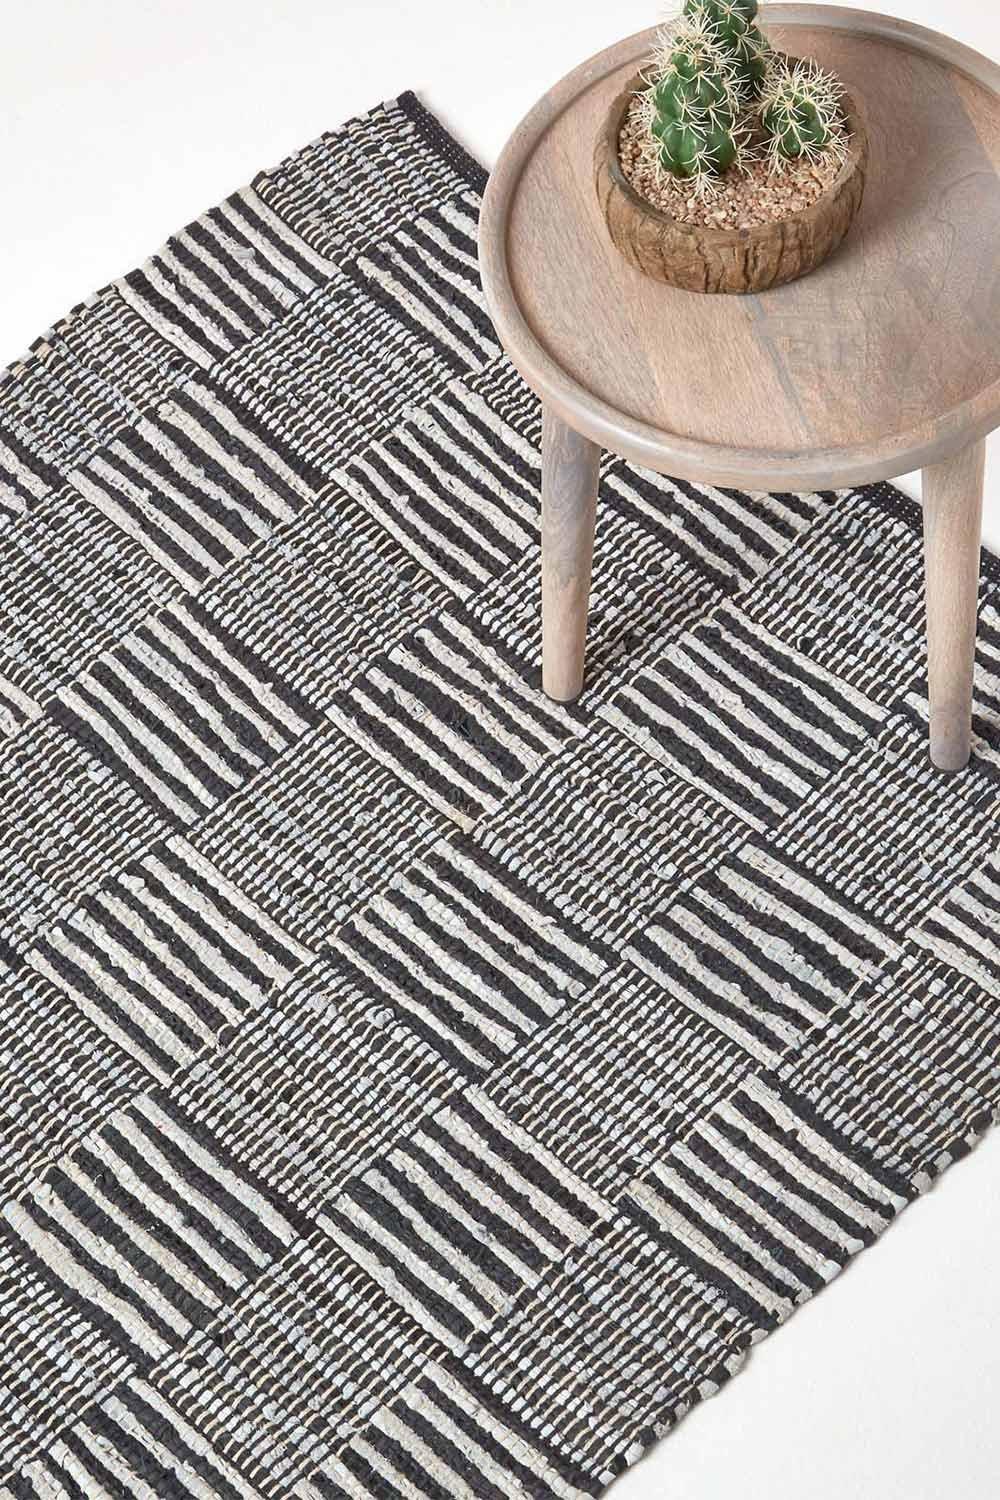 Real Leather Handwoven Striped Block Check Rug